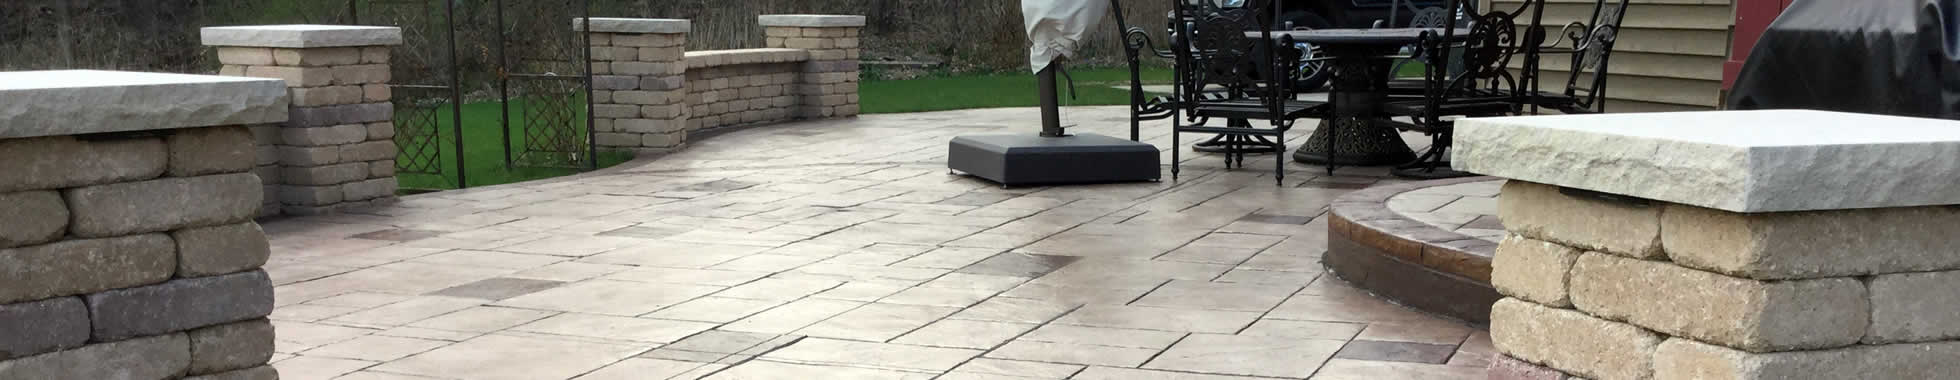 Hardscape Installation Services: Outdoor Kitchens, BBQ Areas, Pergolas, Patios, Fire Pits near me